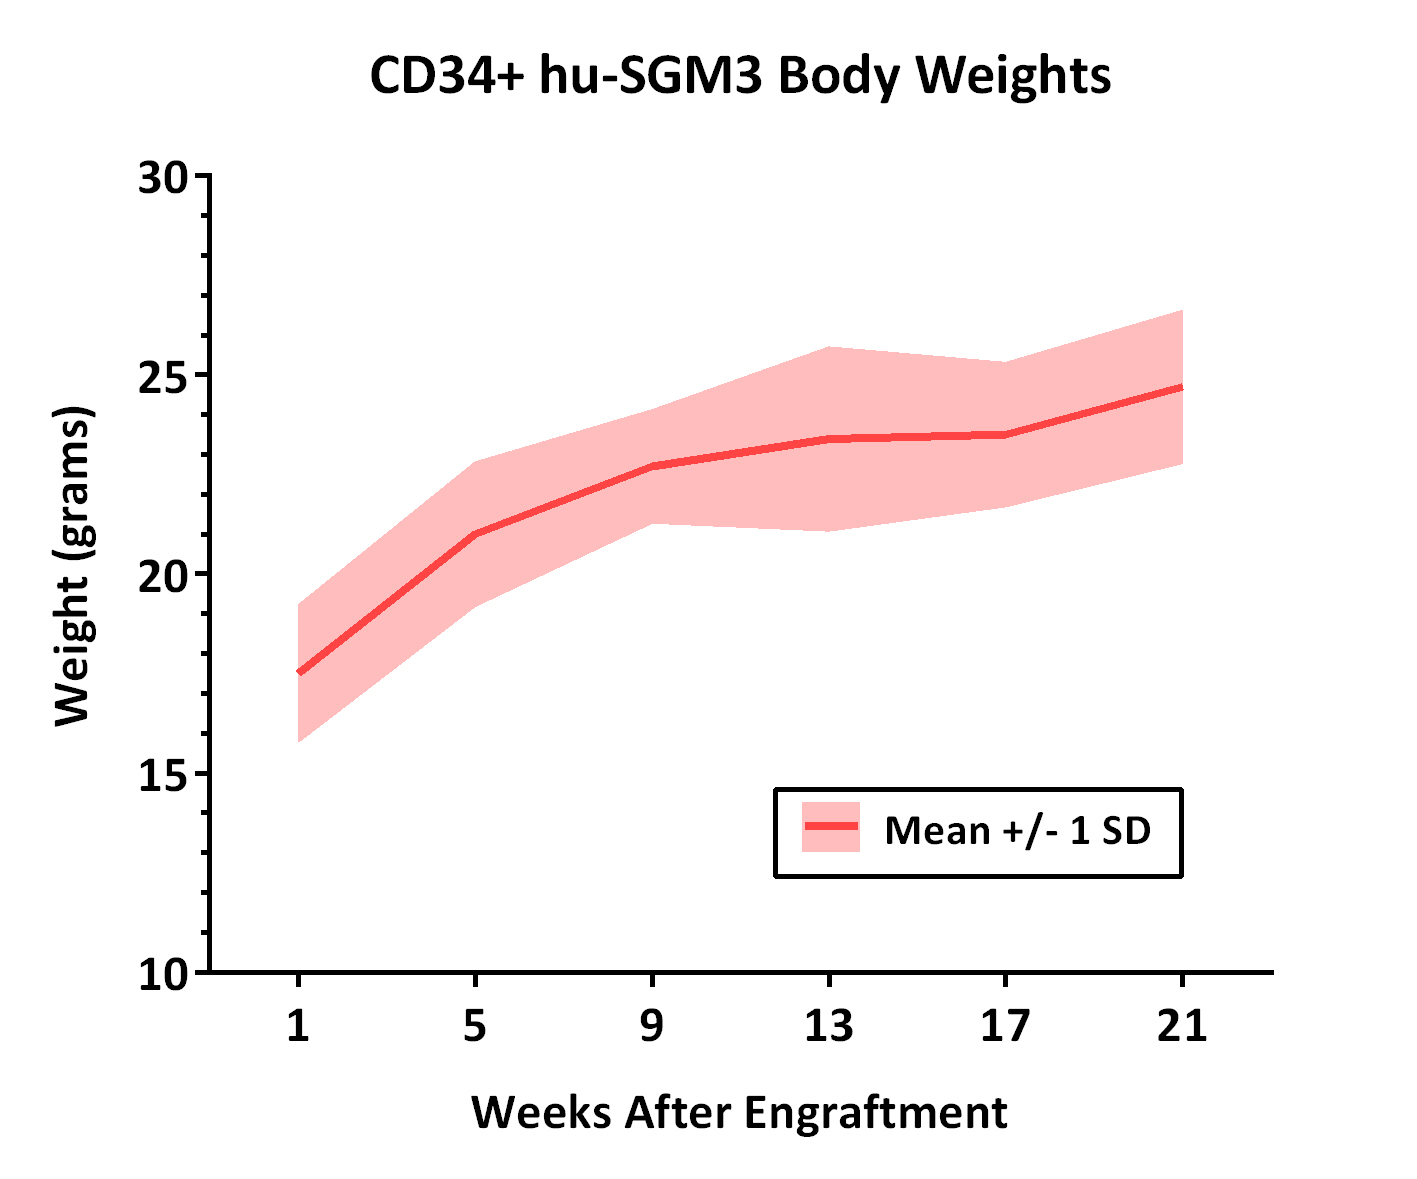 Body Weights for CD34+ HU-SGM3 Mice Body Weights Weeks After Engraftment